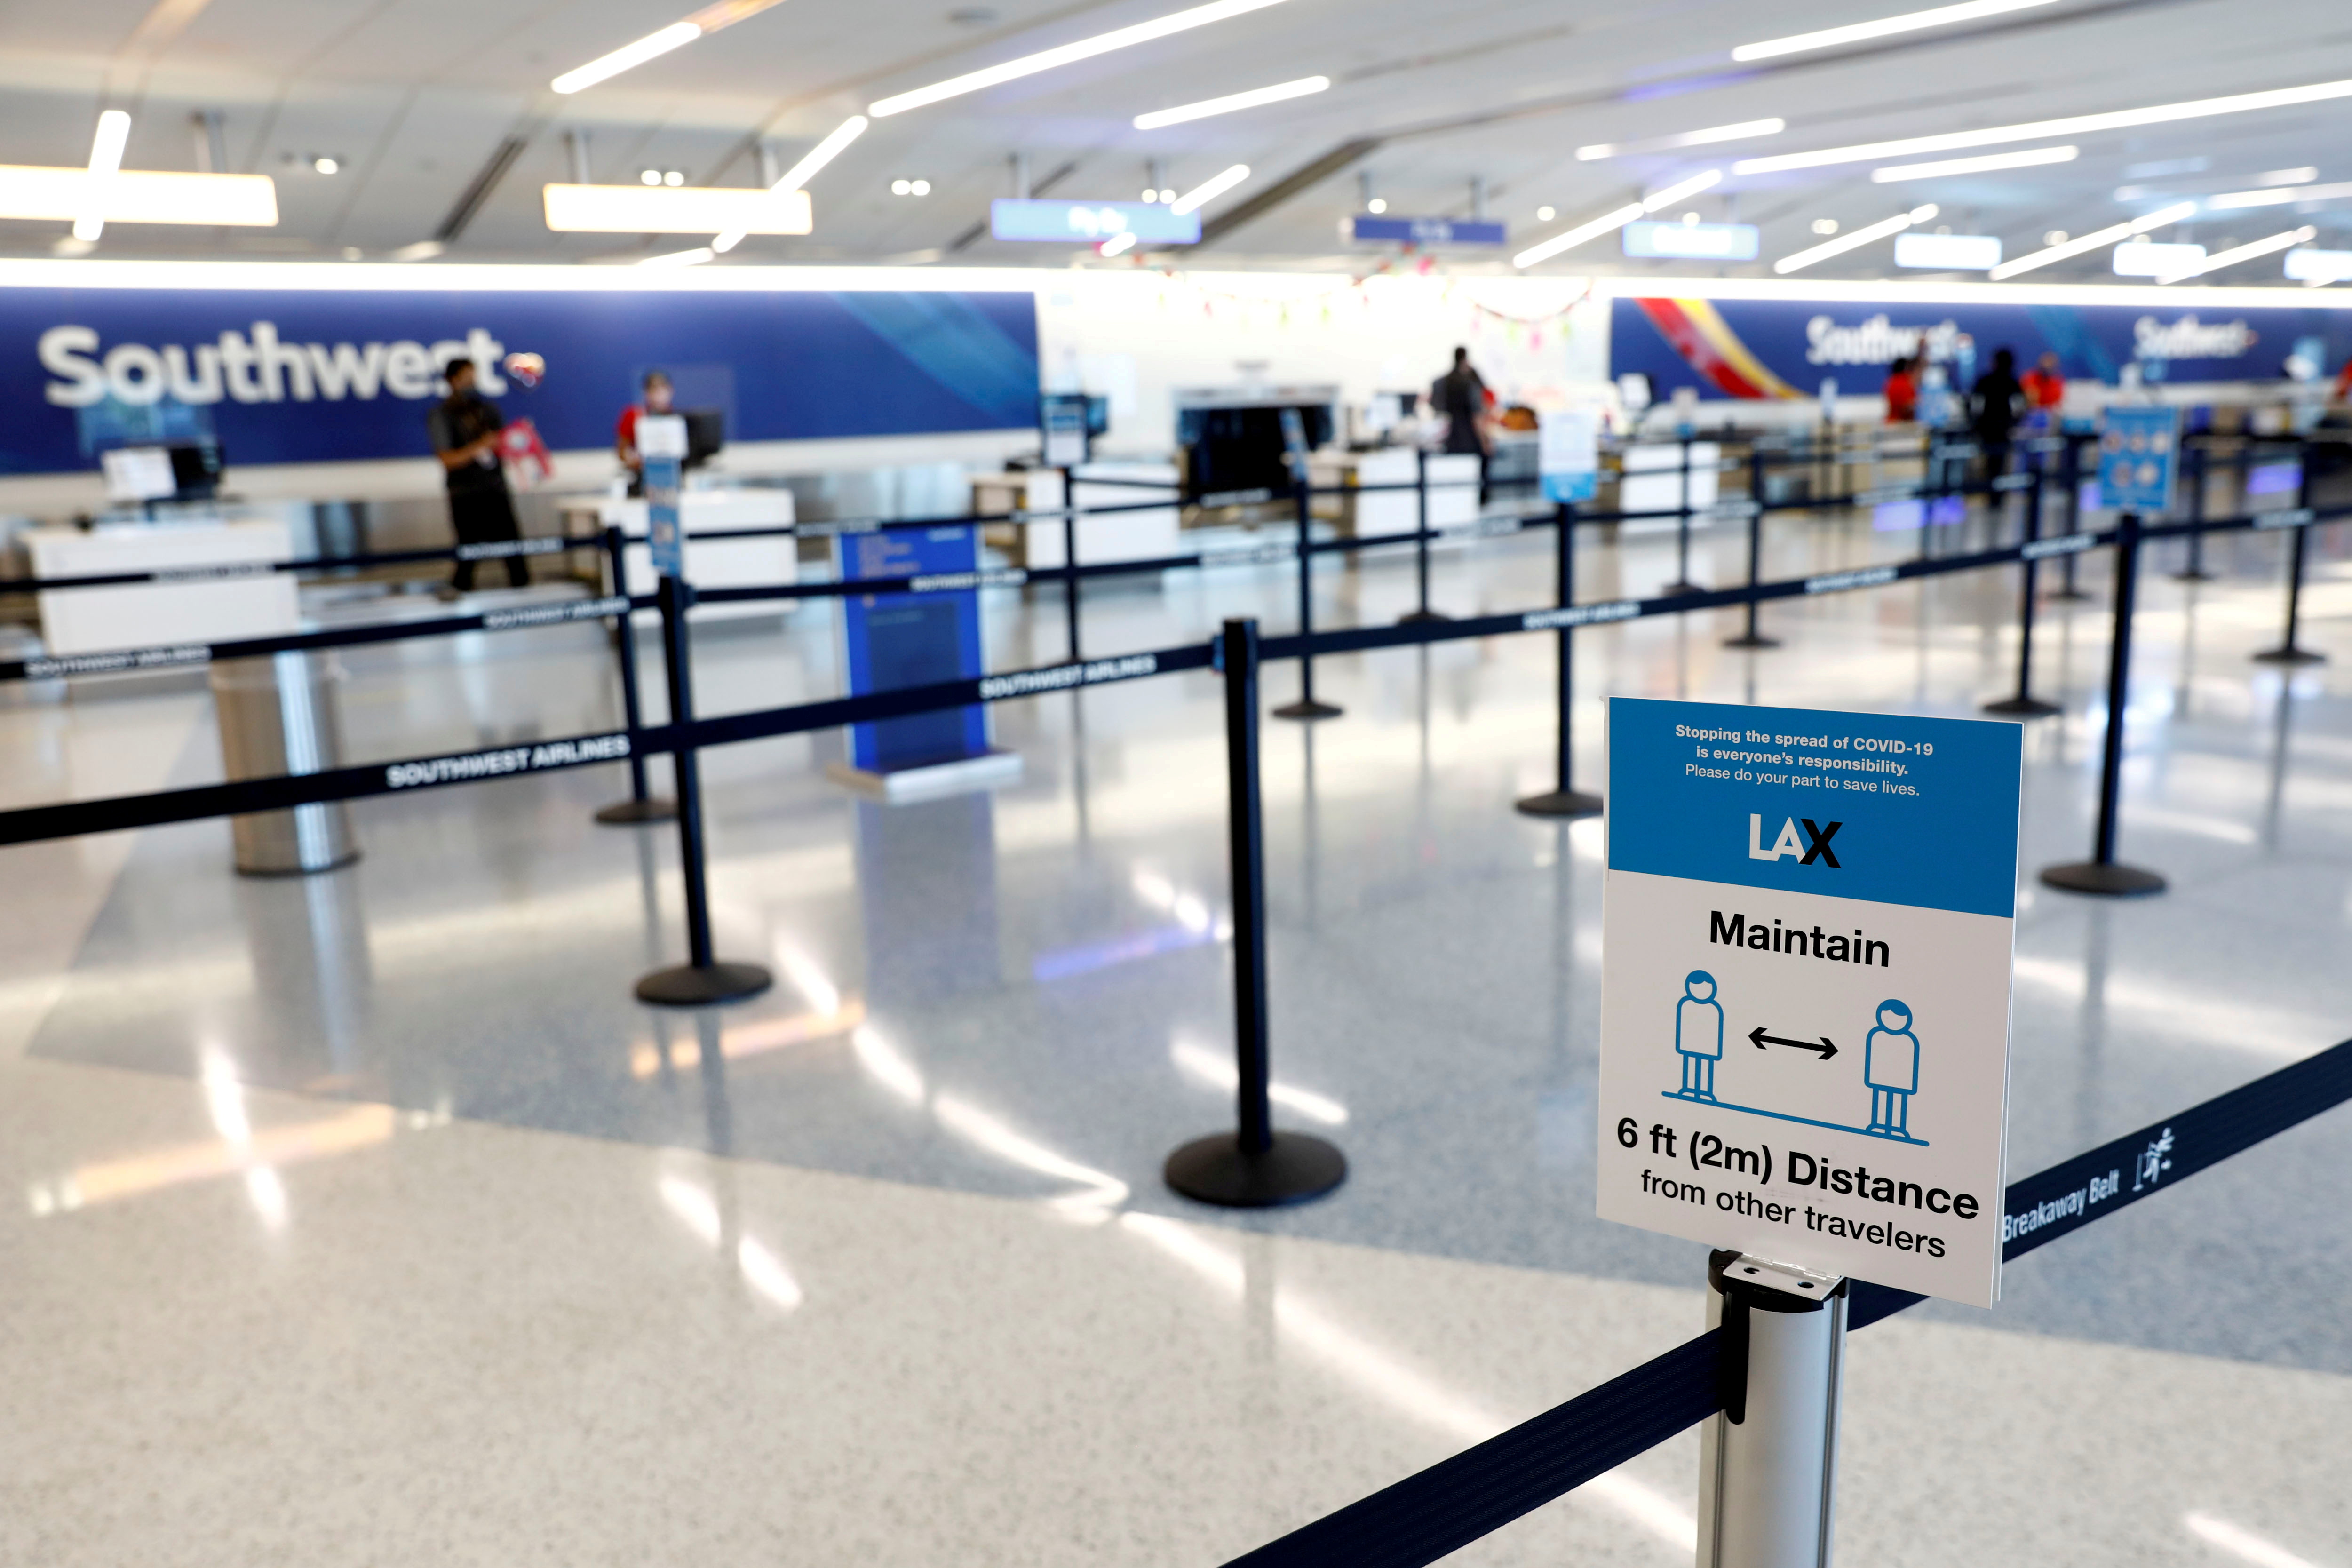 Social distancing sign is displayed at a check-in area for Southwest Airlines Co. at Los Angeles International Airport.  Los Angeles, California, U.S., May 23, 2020. REUTERS/Patrick T. Fallon/File Photo